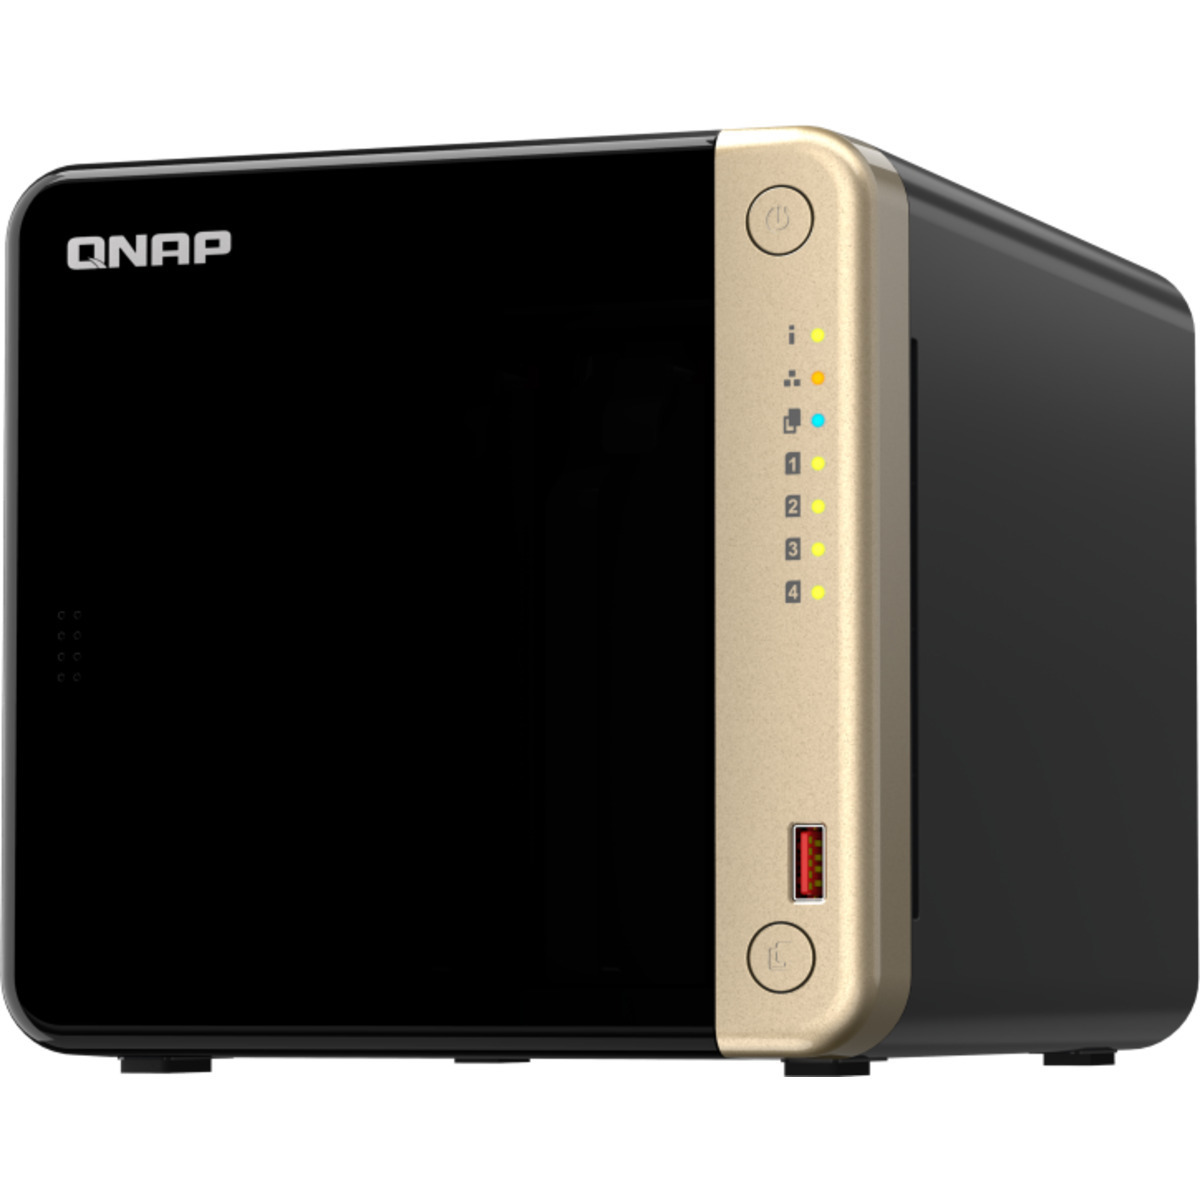 QNAP TS-464 32tb 4-Bay Desktop Multimedia / Power User / Business NAS - Network Attached Storage Device 4x8tb Seagate IronWolf Pro ST8000NT001 3.5 7200rpm SATA 6Gb/s HDD NAS Class Drives Installed - Burn-In Tested - ON SALE TS-464